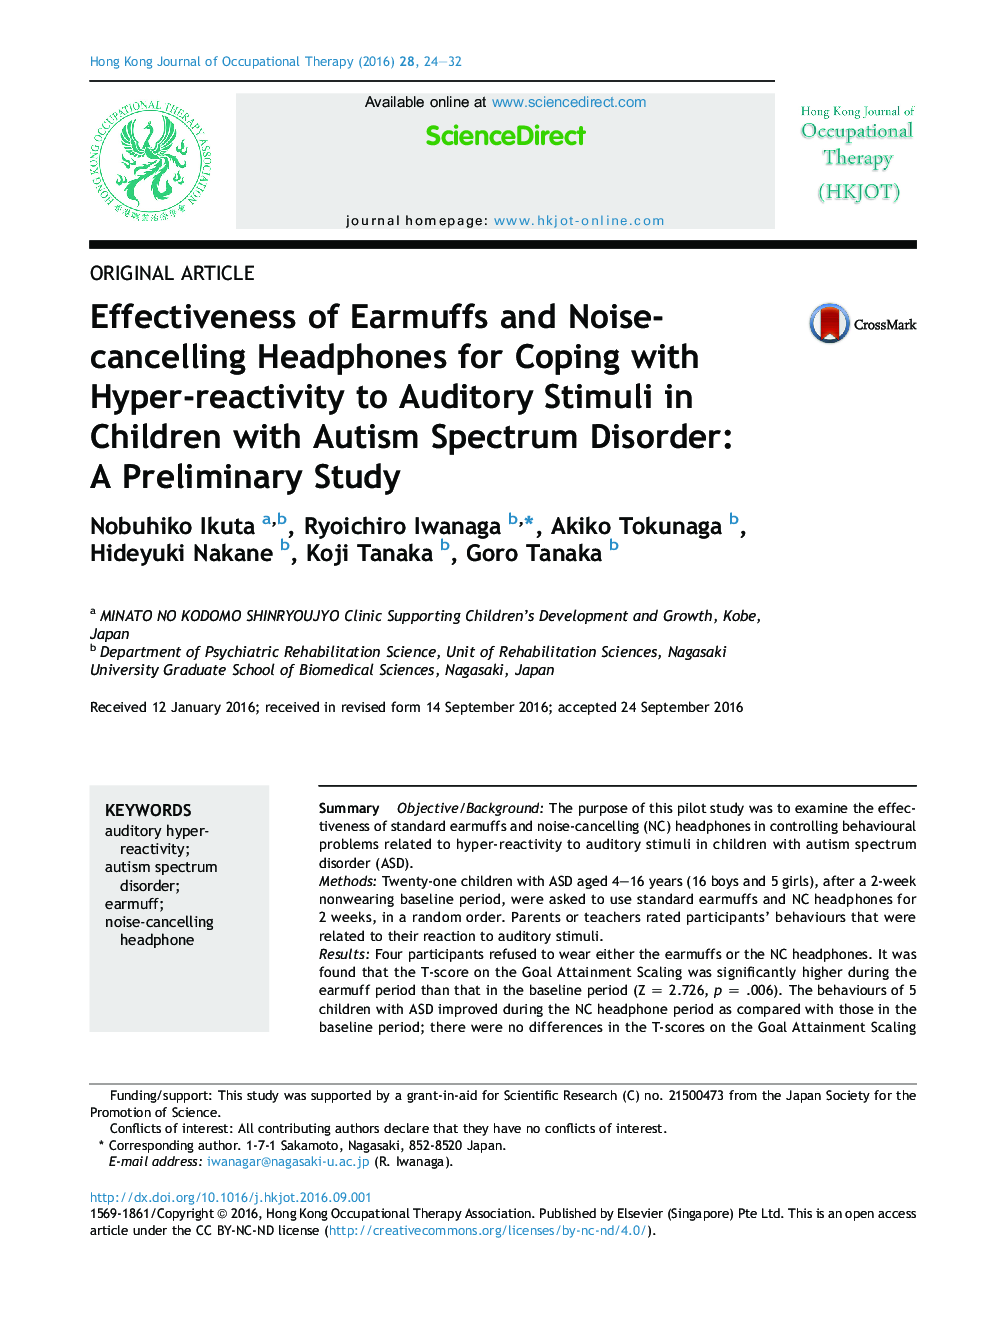 Effectiveness of Earmuffs and Noise-cancelling Headphones for Coping with Hyper-reactivity to Auditory Stimuli in Children with Autism Spectrum Disorder: AÂ Preliminary Study